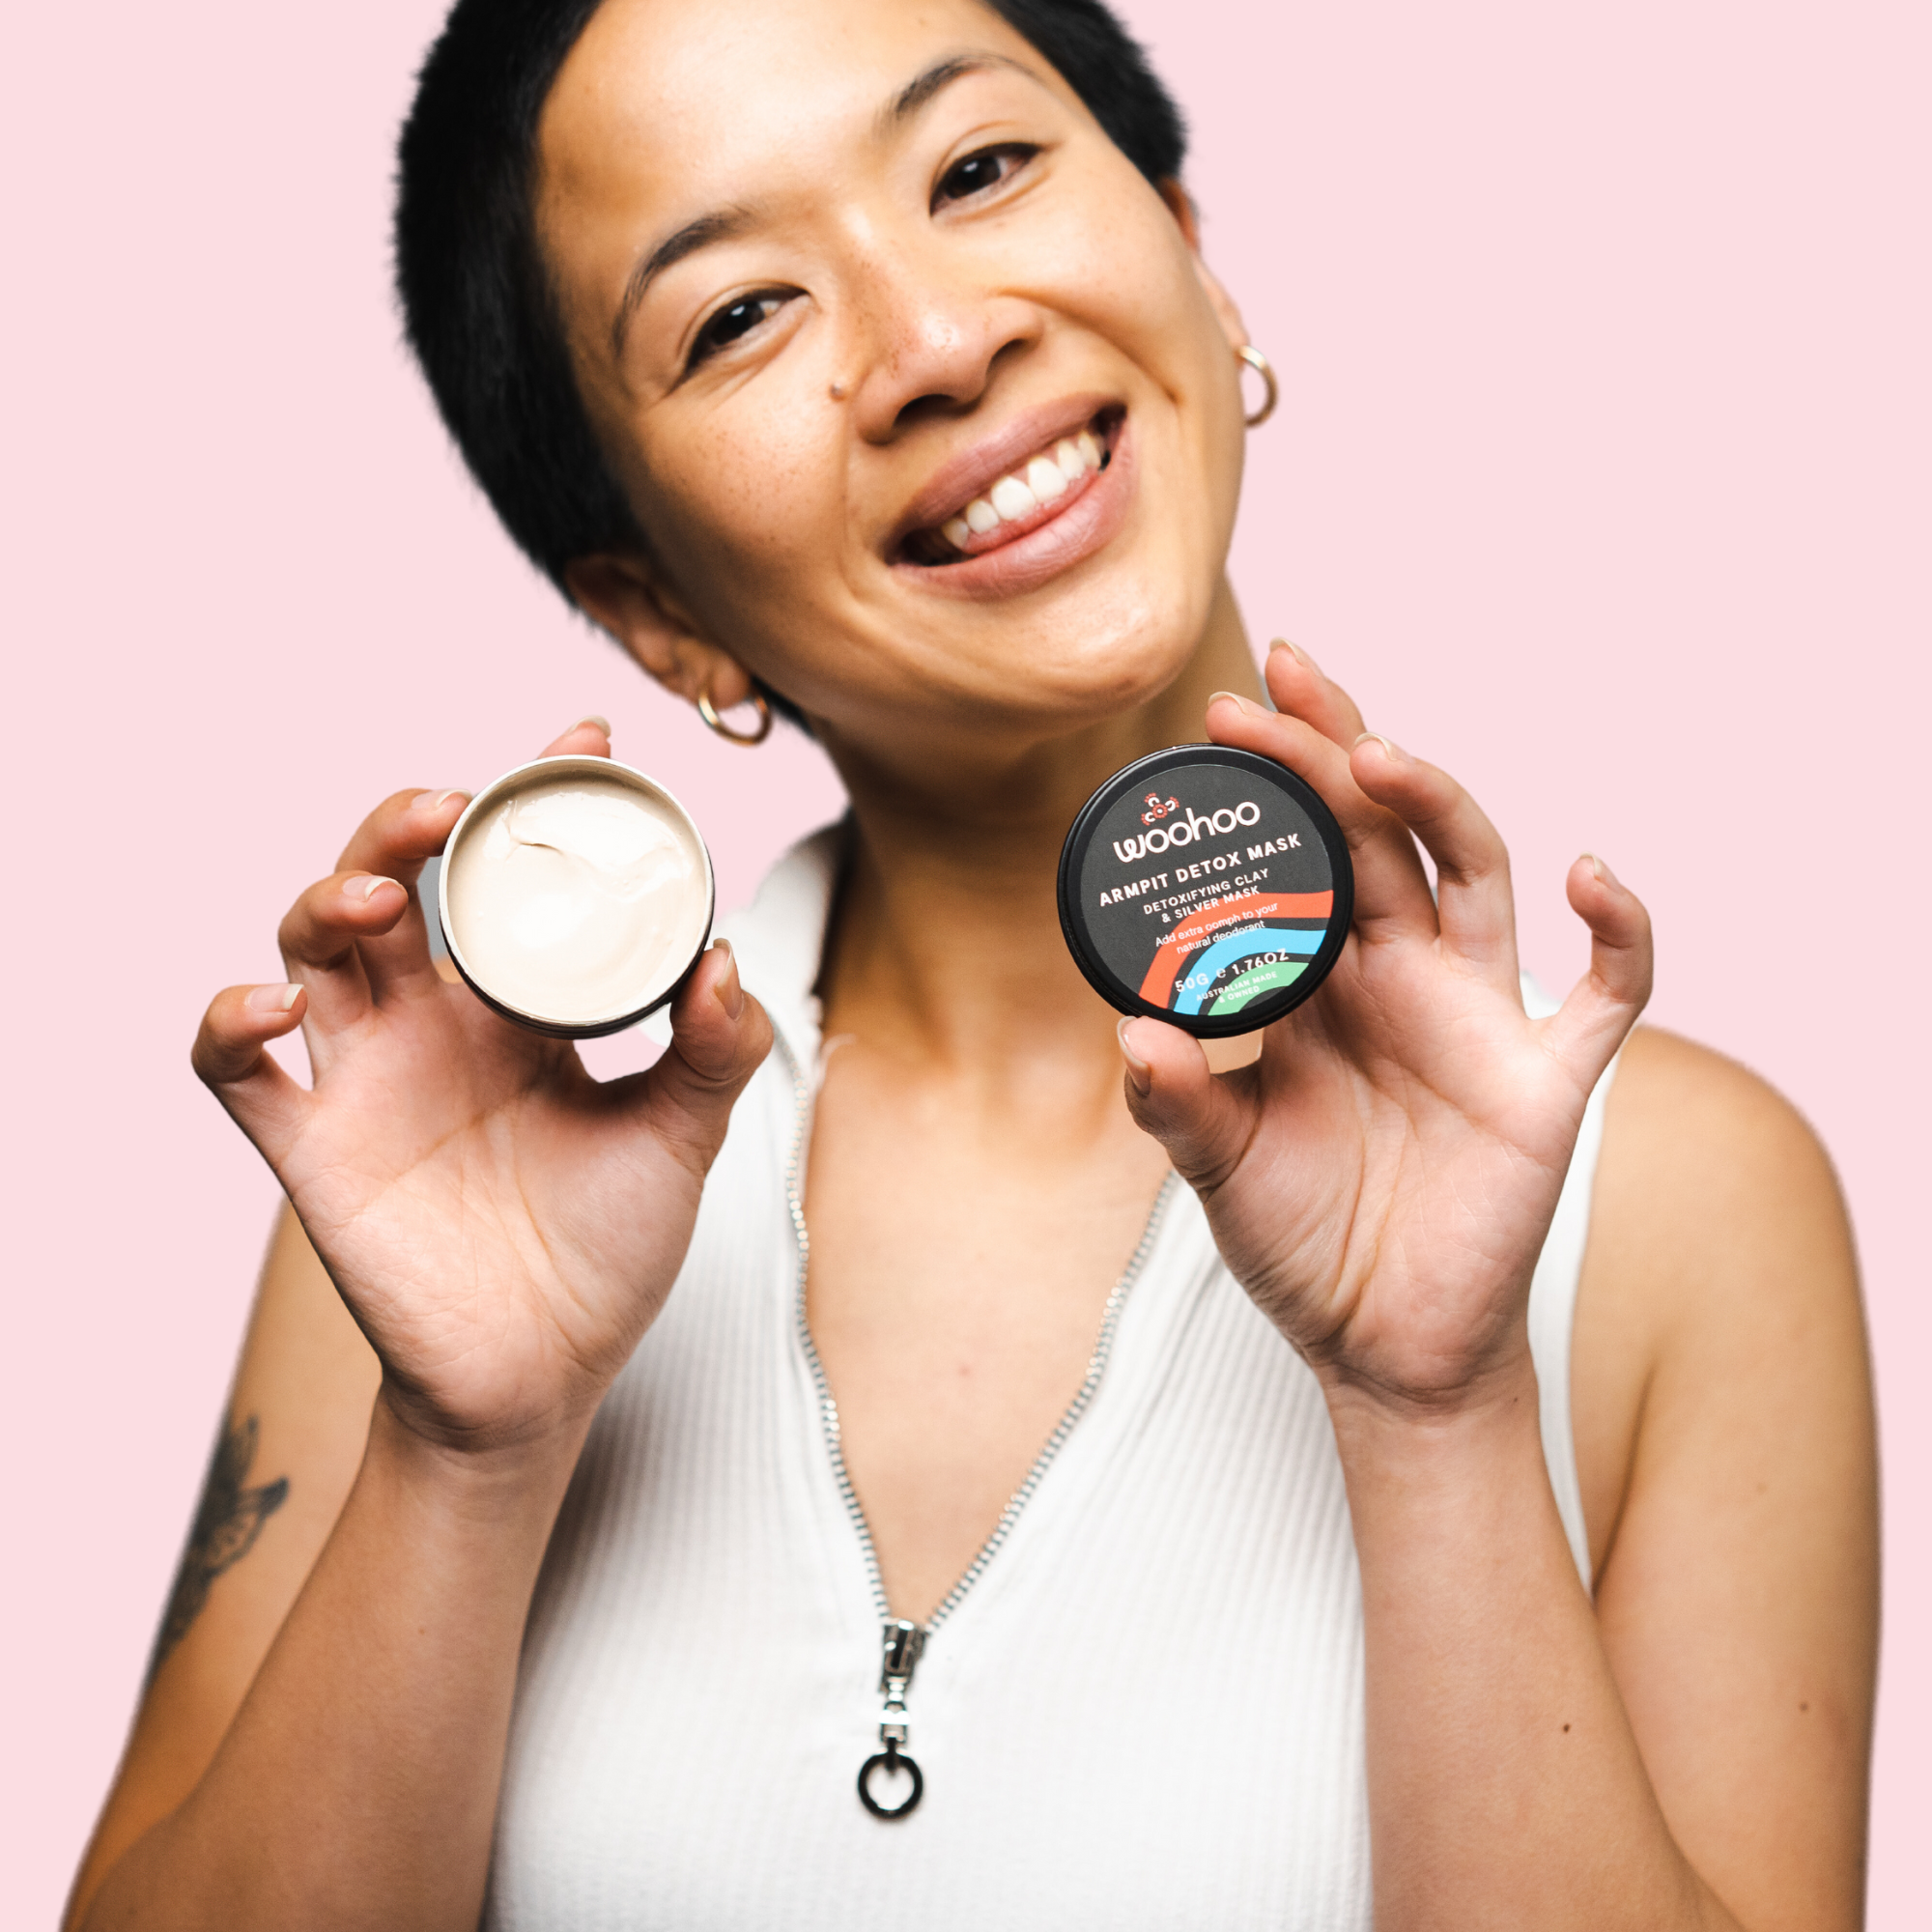 lady smiling at camera holding open tin of woohoo armpit detox mask in one hand and the tin lid in the other hand